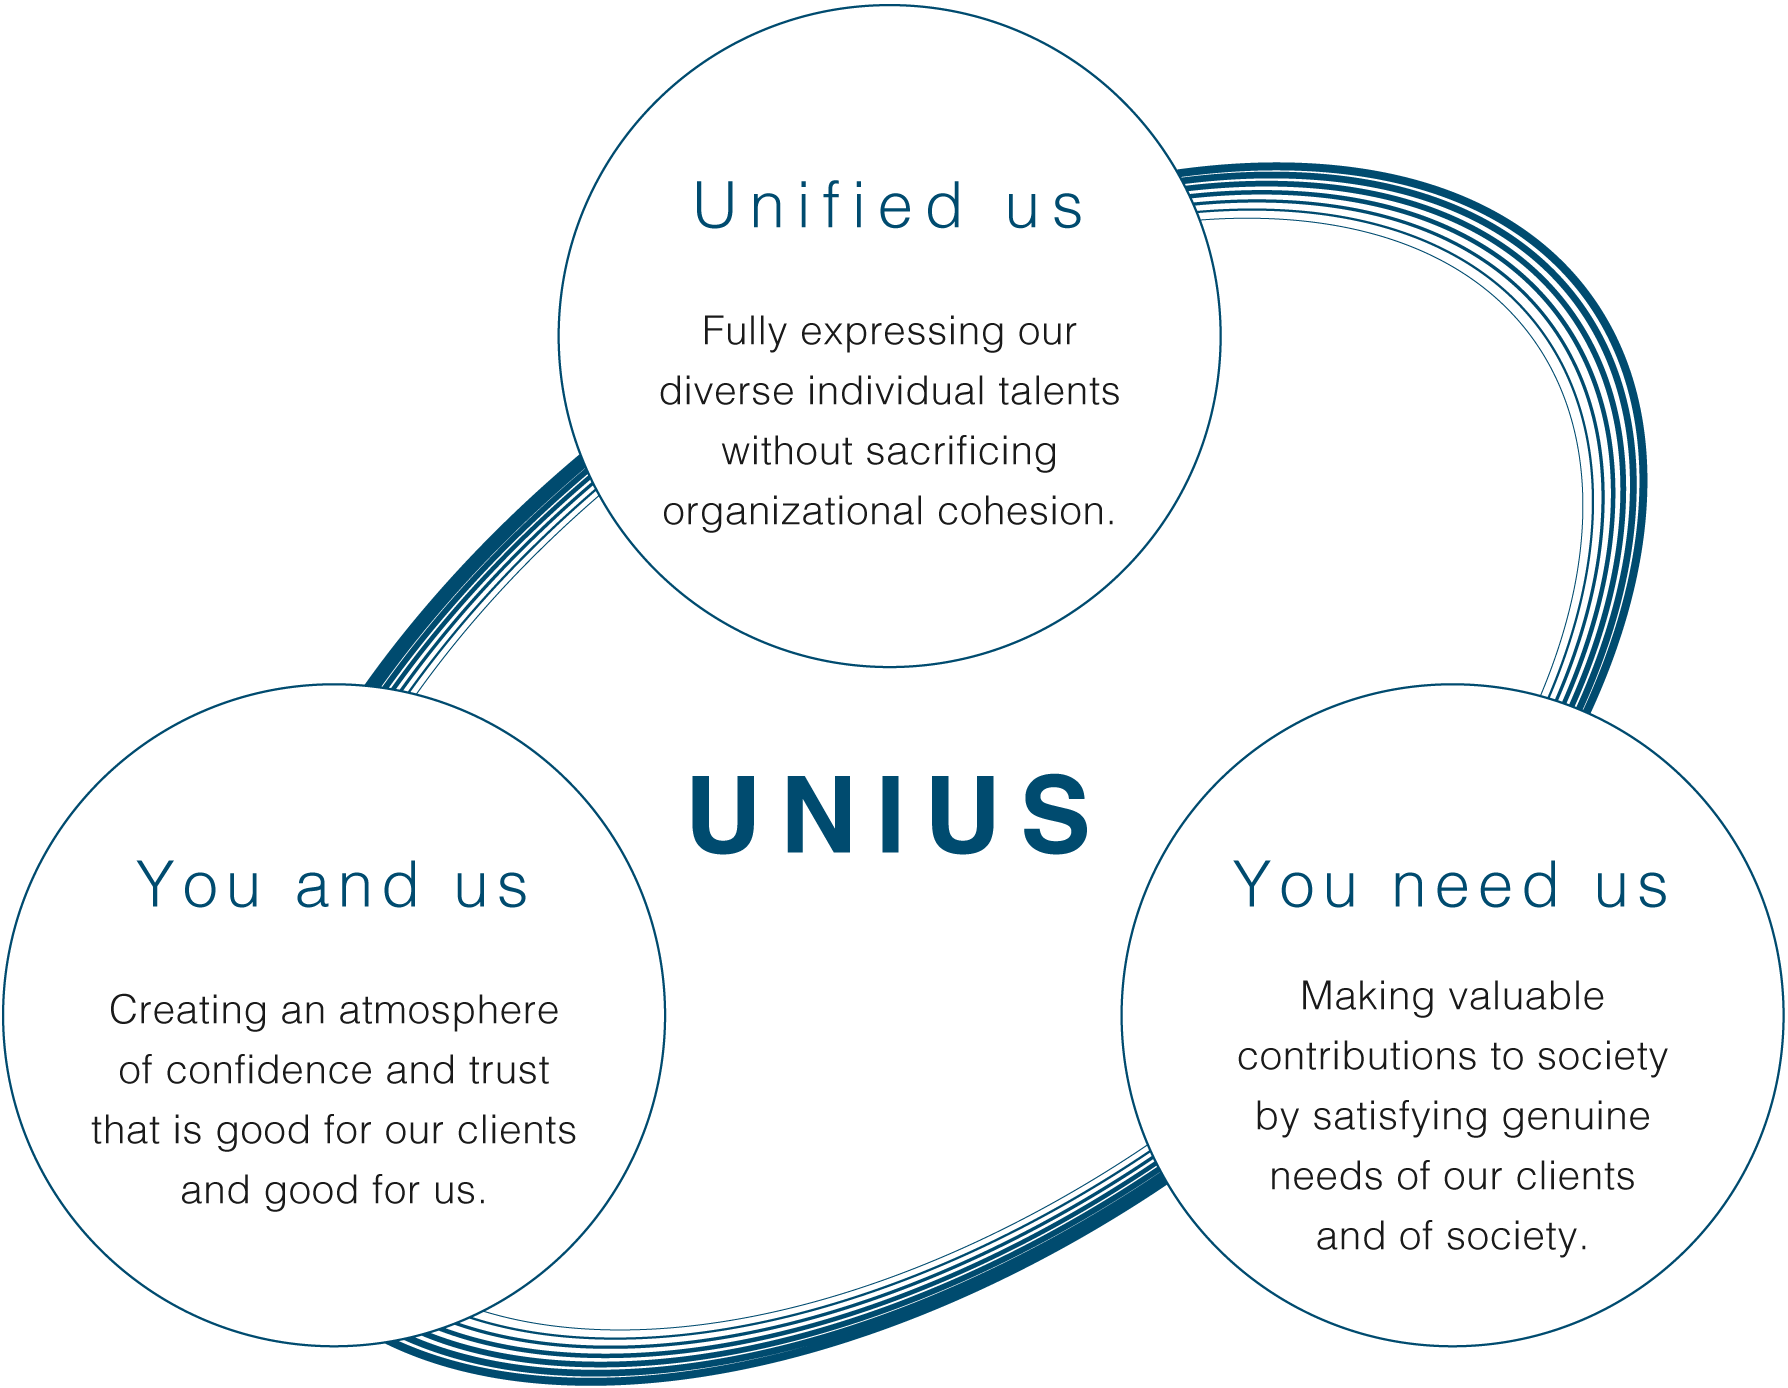 Unified us Fully expressing our diverse individual talents without sacrificing organizational cohesion. You and us Creating an atmosphere of confidence and trust that is good for our clients and good for us. You need us Making valuable contributions to society by satisfying genuine needs of our clients and of society.